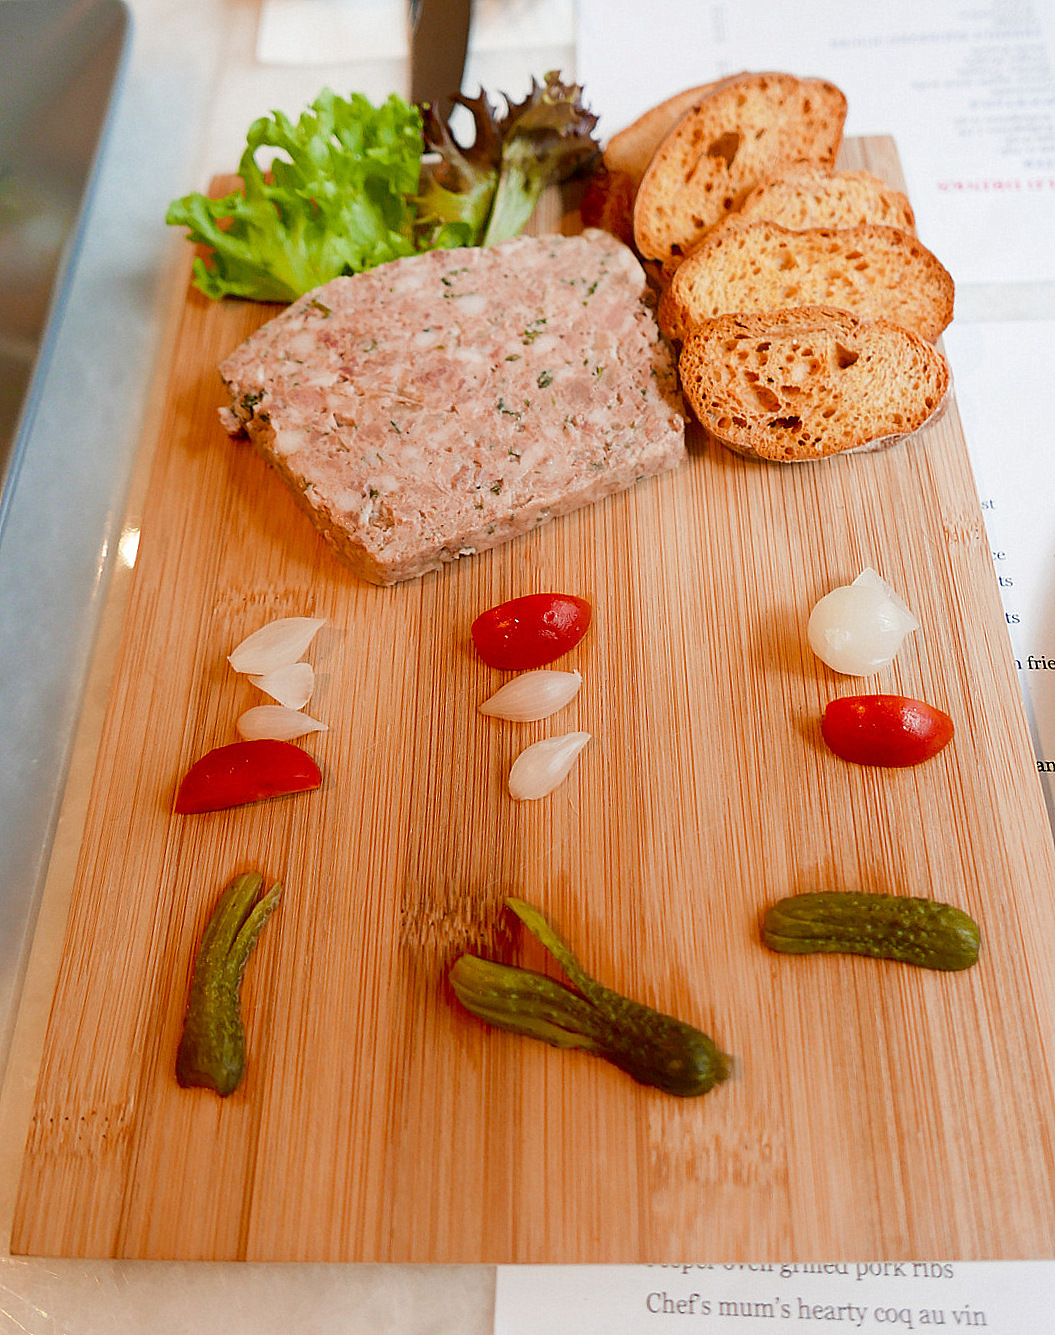 6.1 rustic duck rillettes, tender & fleshy, paired with pickled gherkins